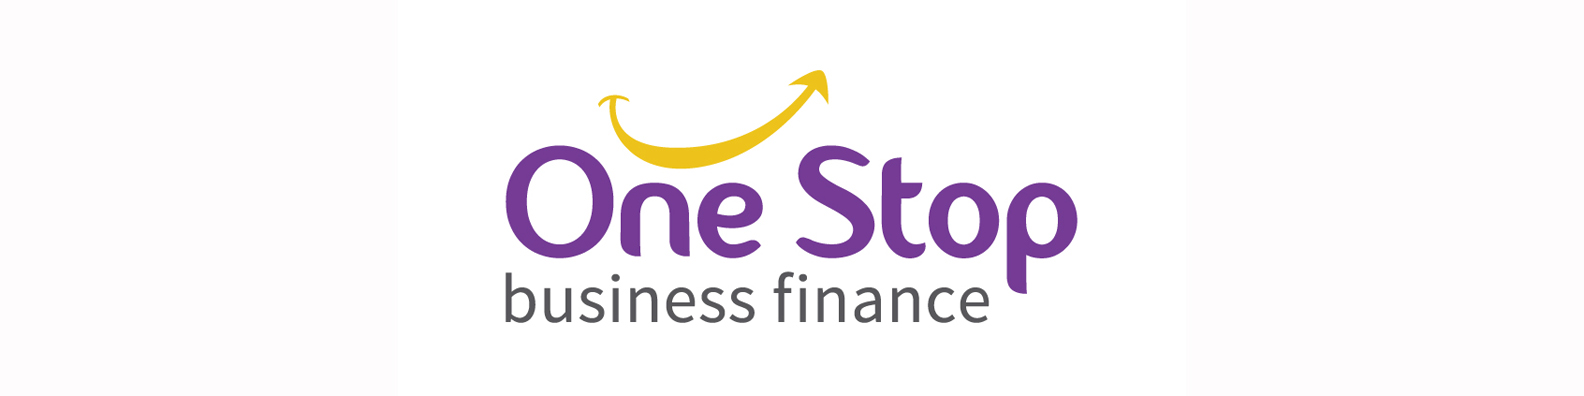 One Stop Business Finance